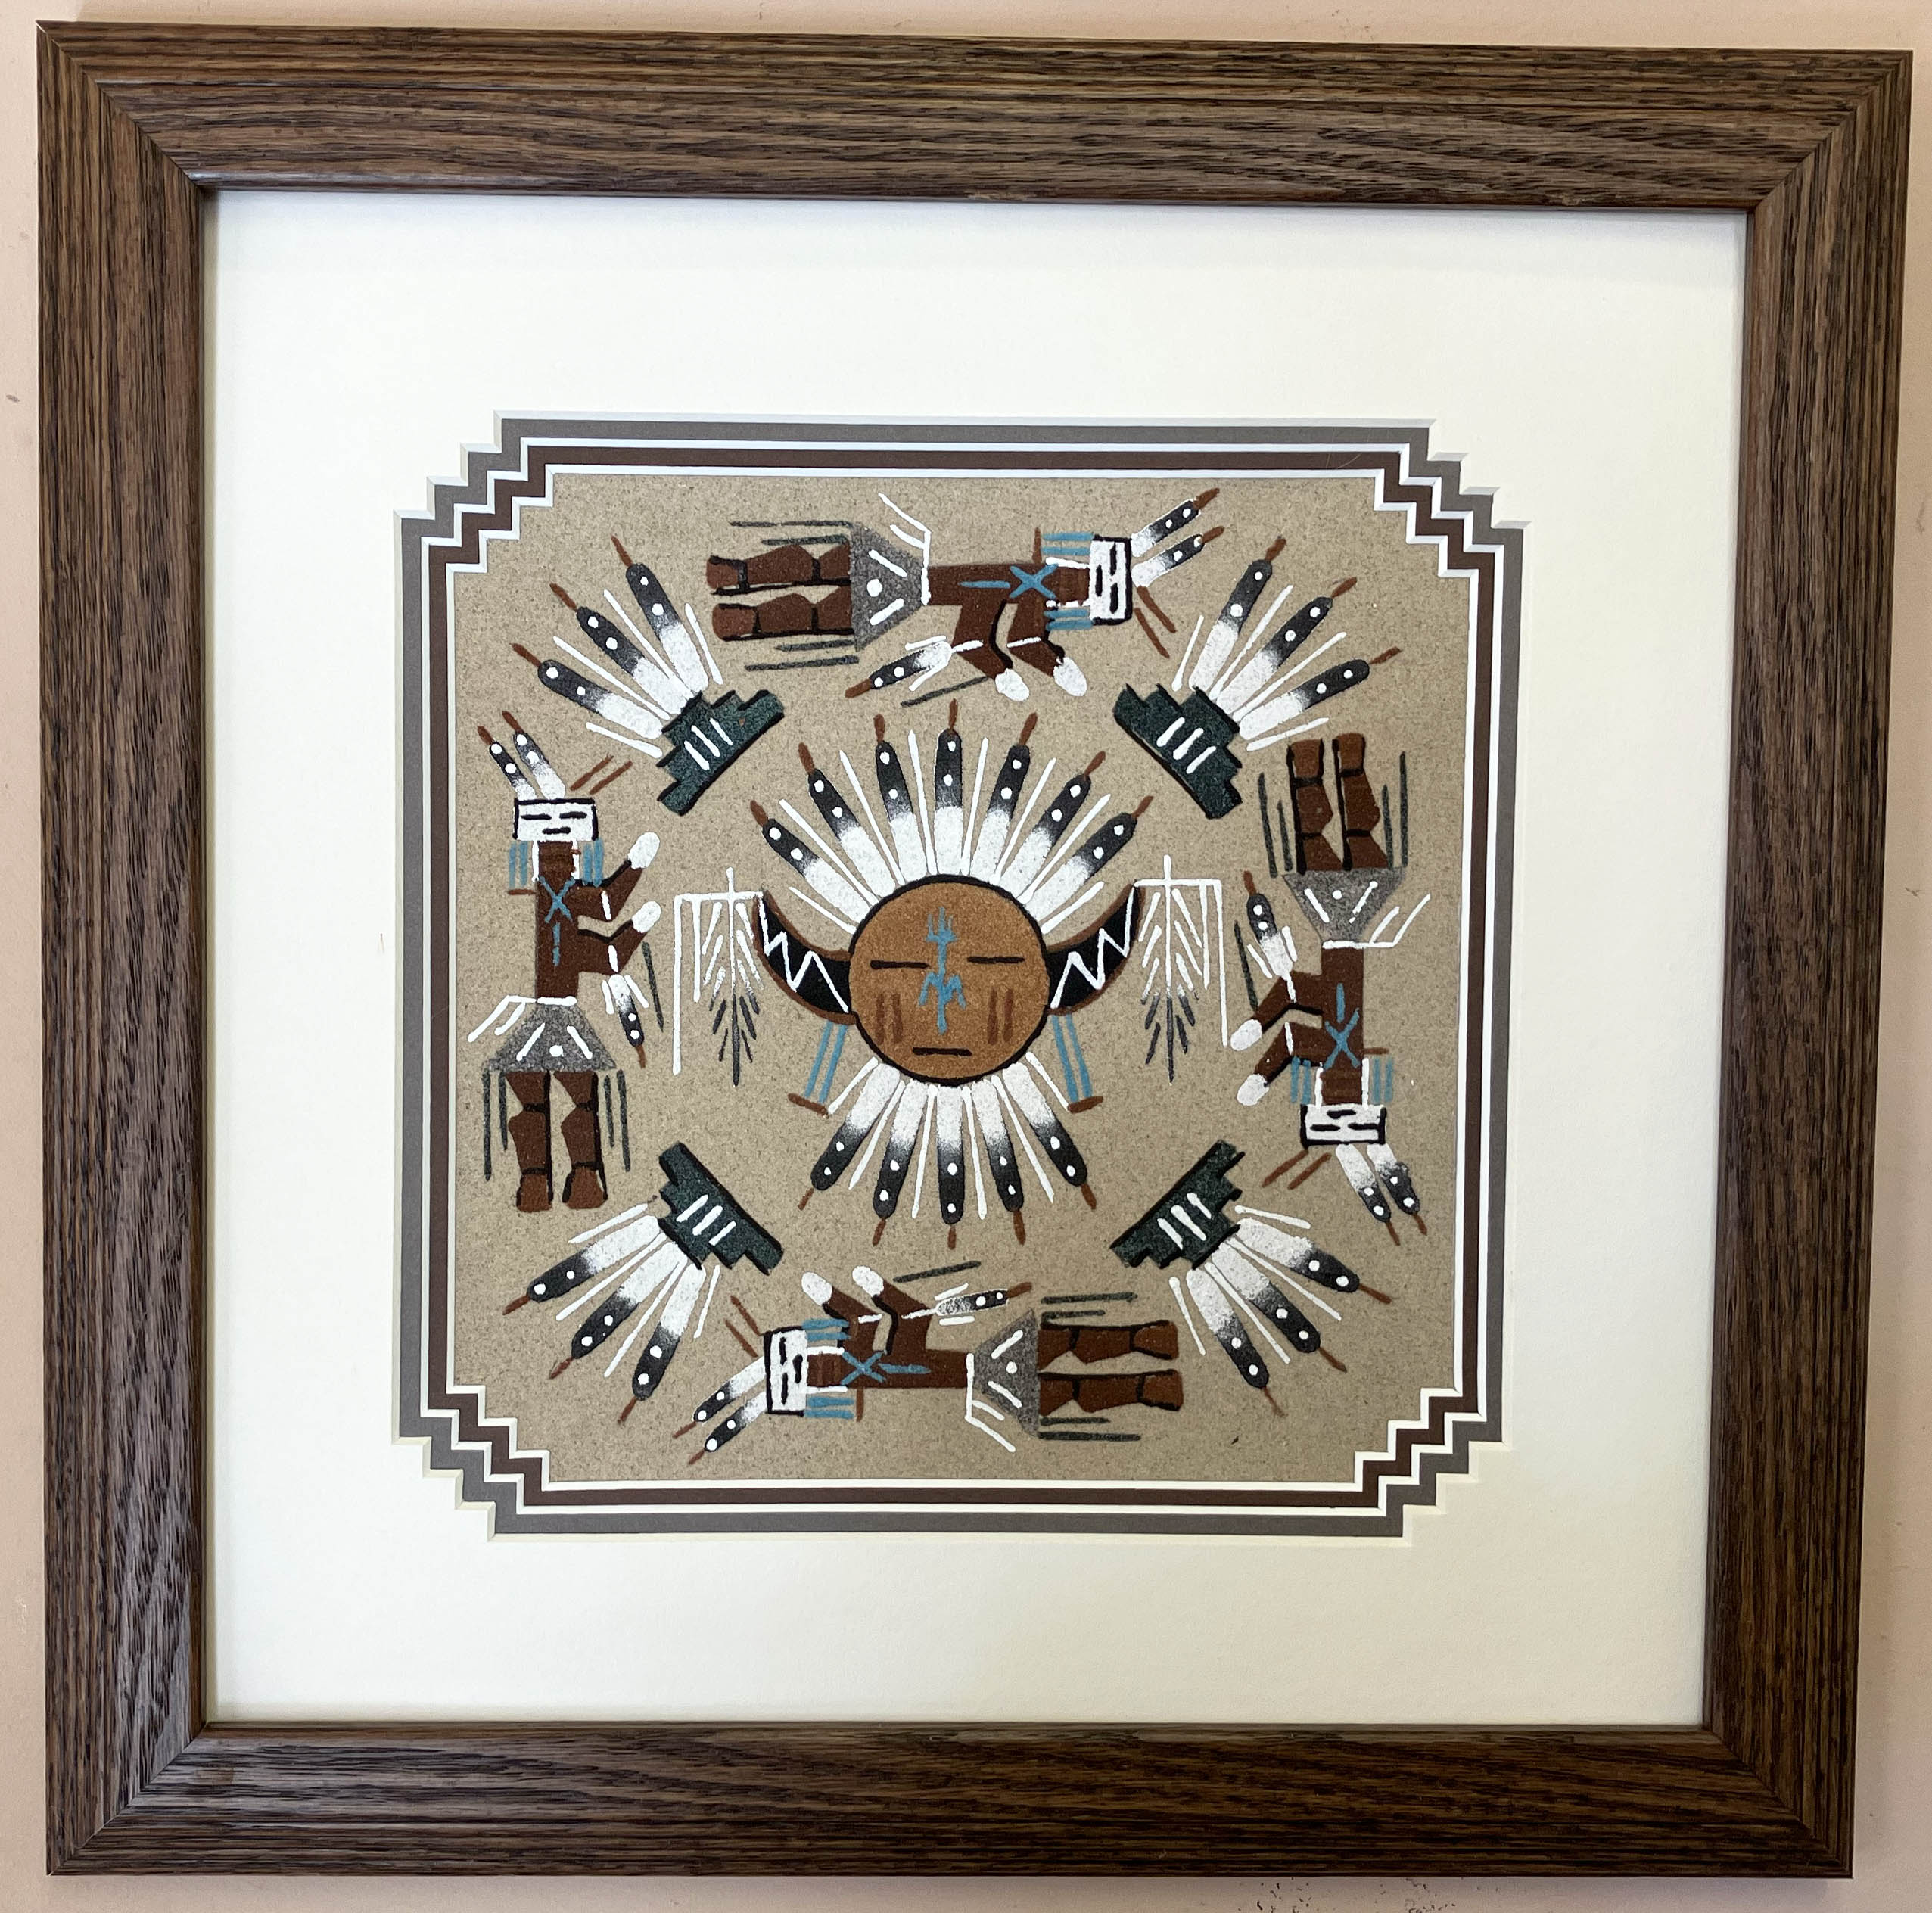 Glen Nez | Home of the Buffalo Navajo Sandpainting | Penfield Gallery of Indian Arts | Albuquerque, New Mexico